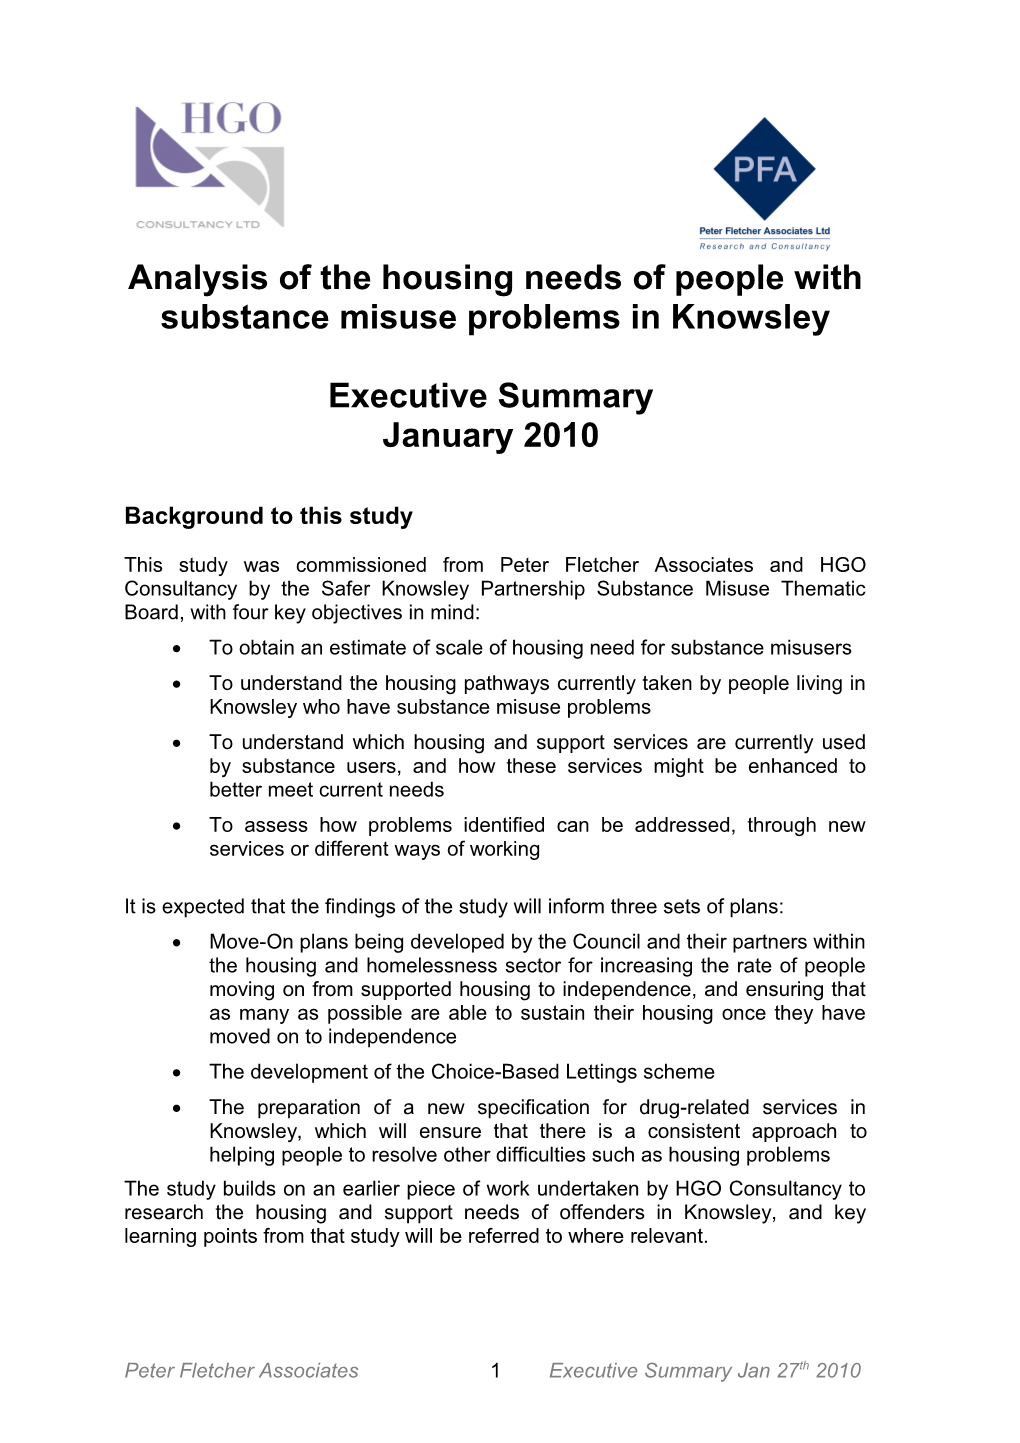 Analysis of the Housing Needs of People with Substance Misuse Problems in Knowsley